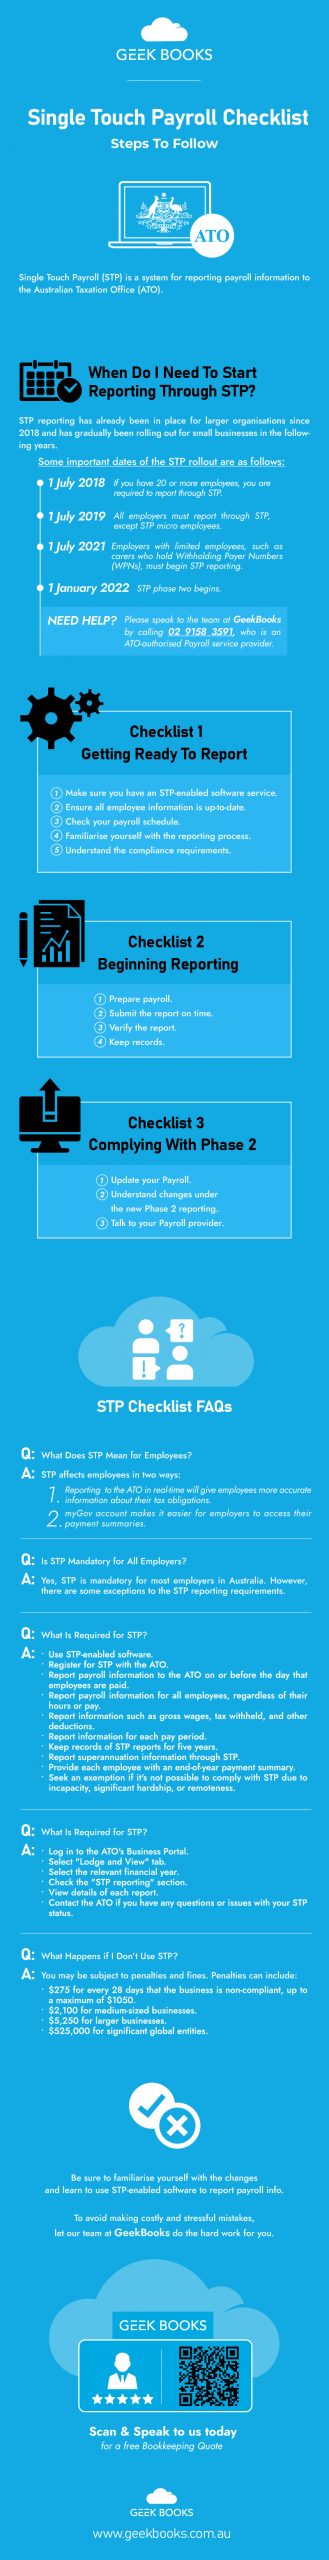 The Single Touch Payroll Checklist - Steps To Follow Infographic